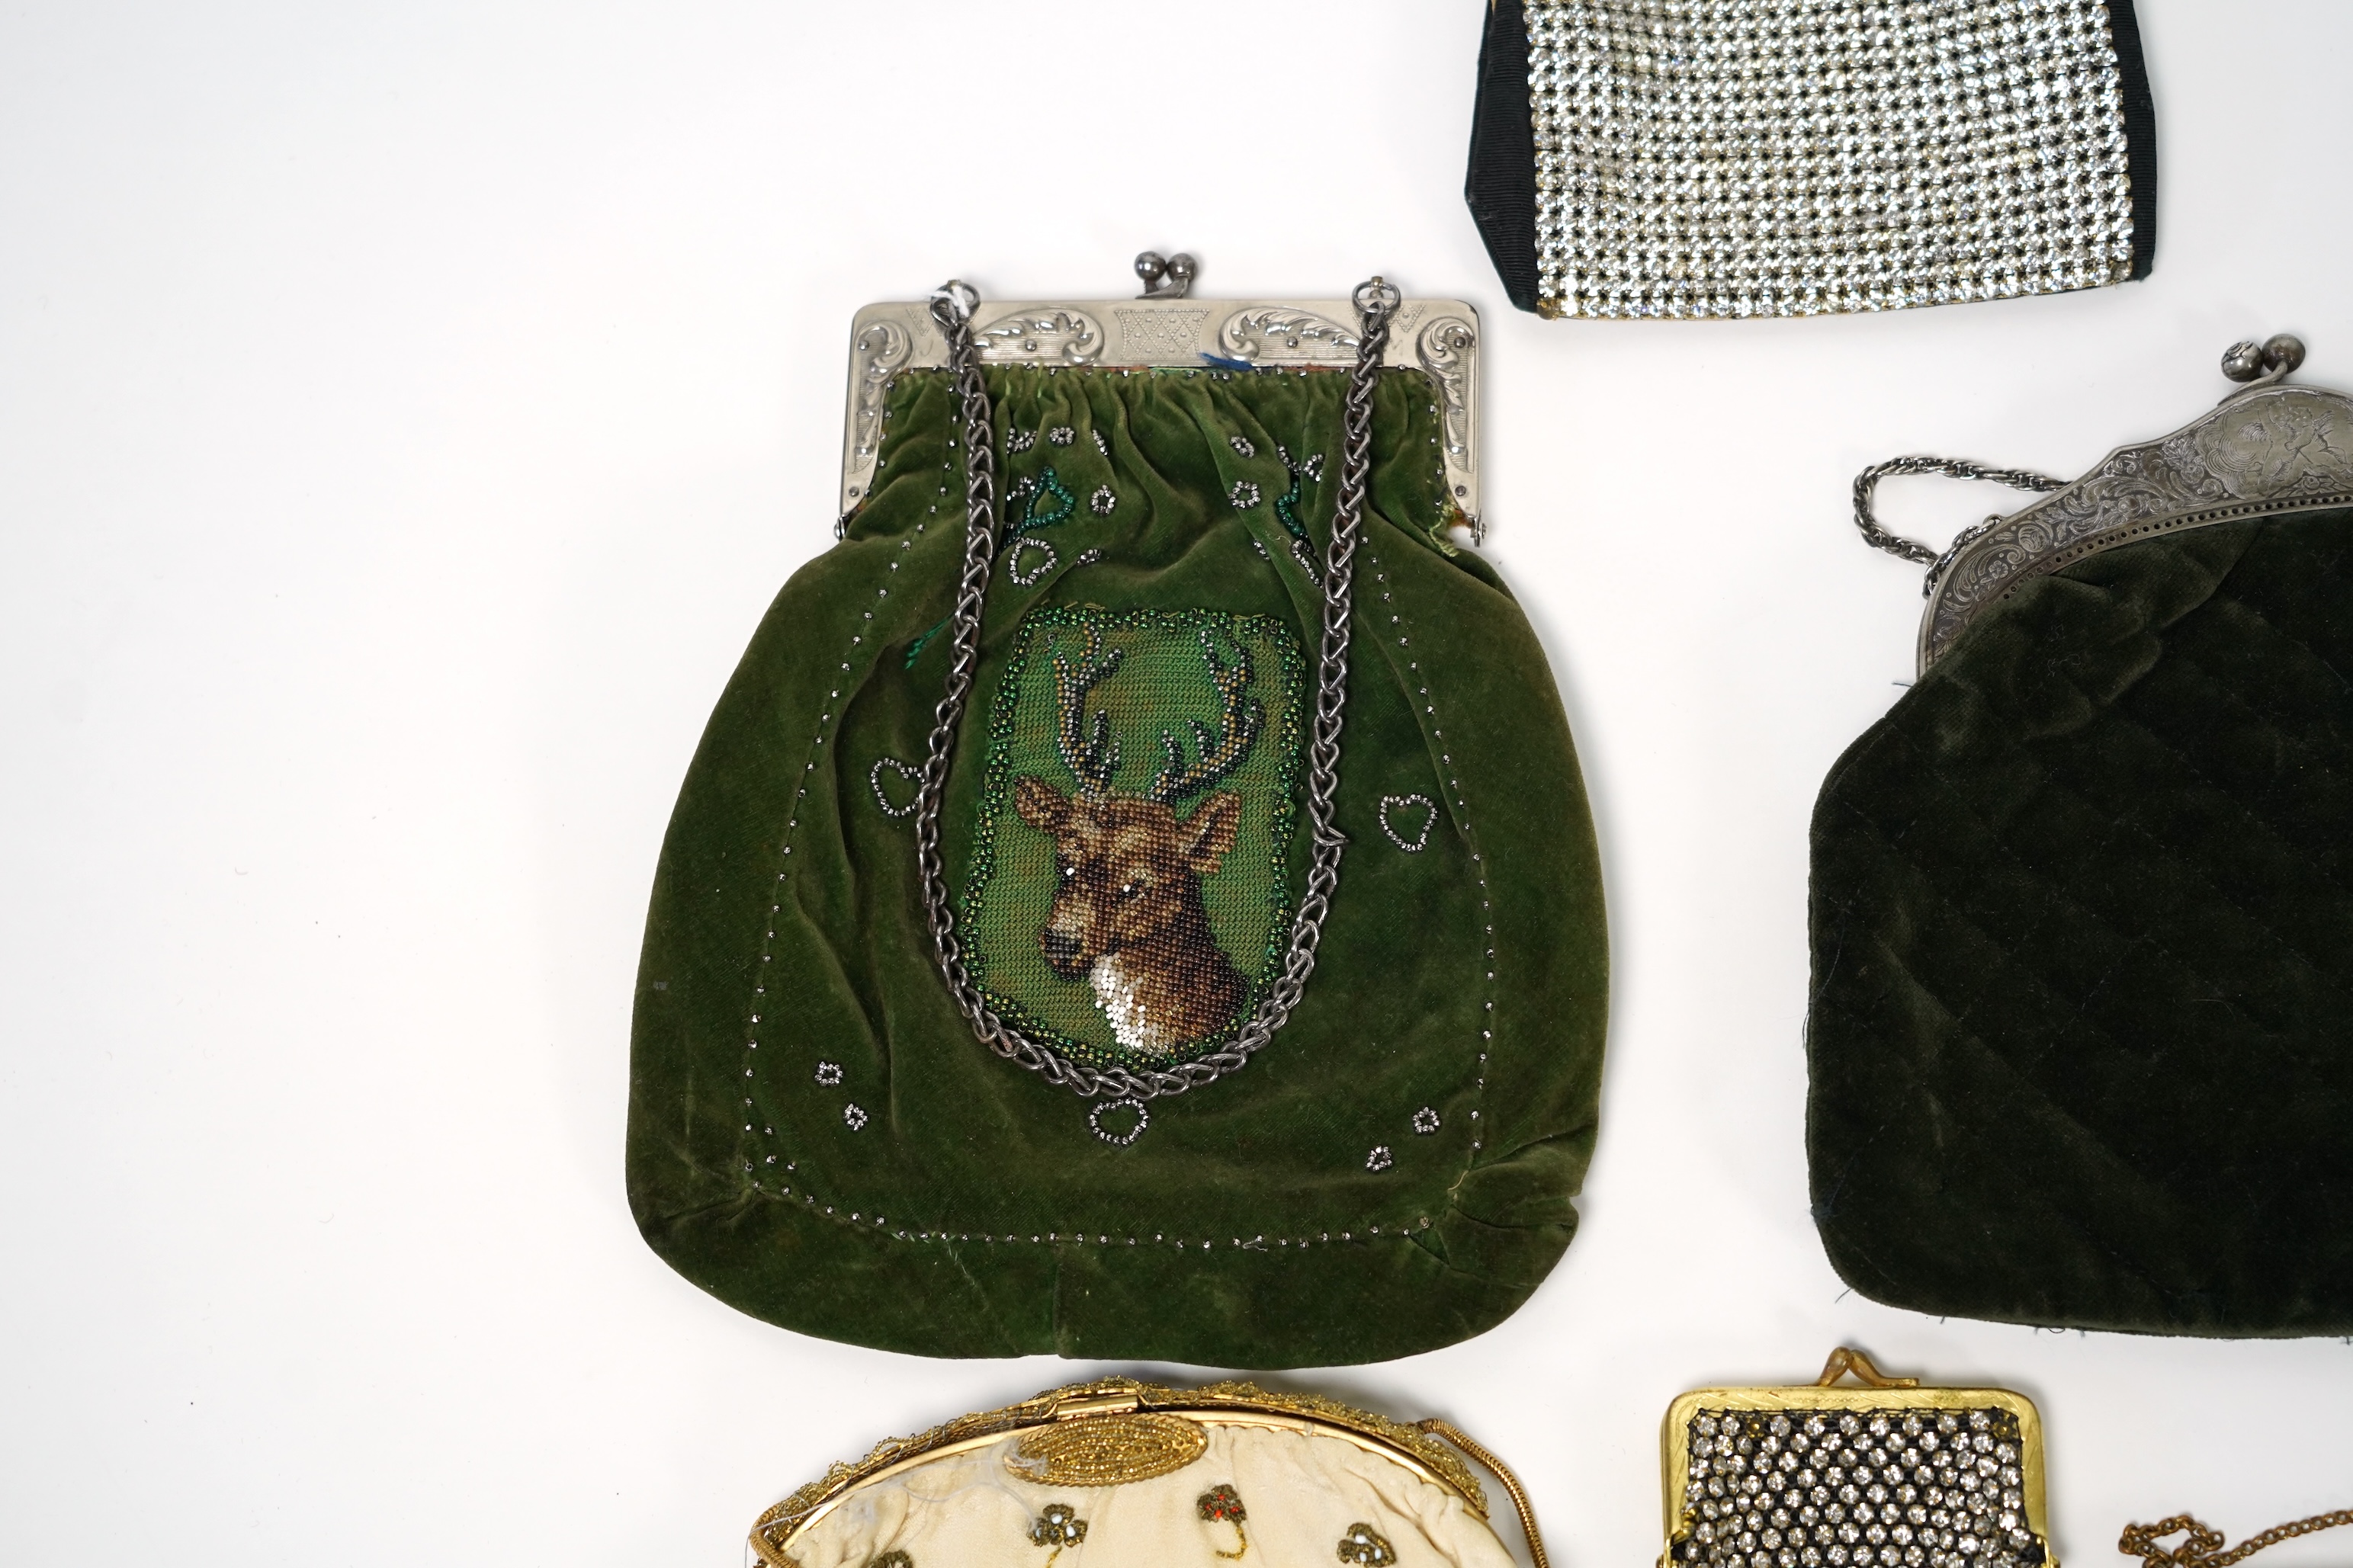 Mixed evening bags; including a 19th century velvet and cut steel handbag, a similar bag, three later gold metallic embroidered evening bags, a mixed metalic evening bag and a diamonte bag and purse (8)